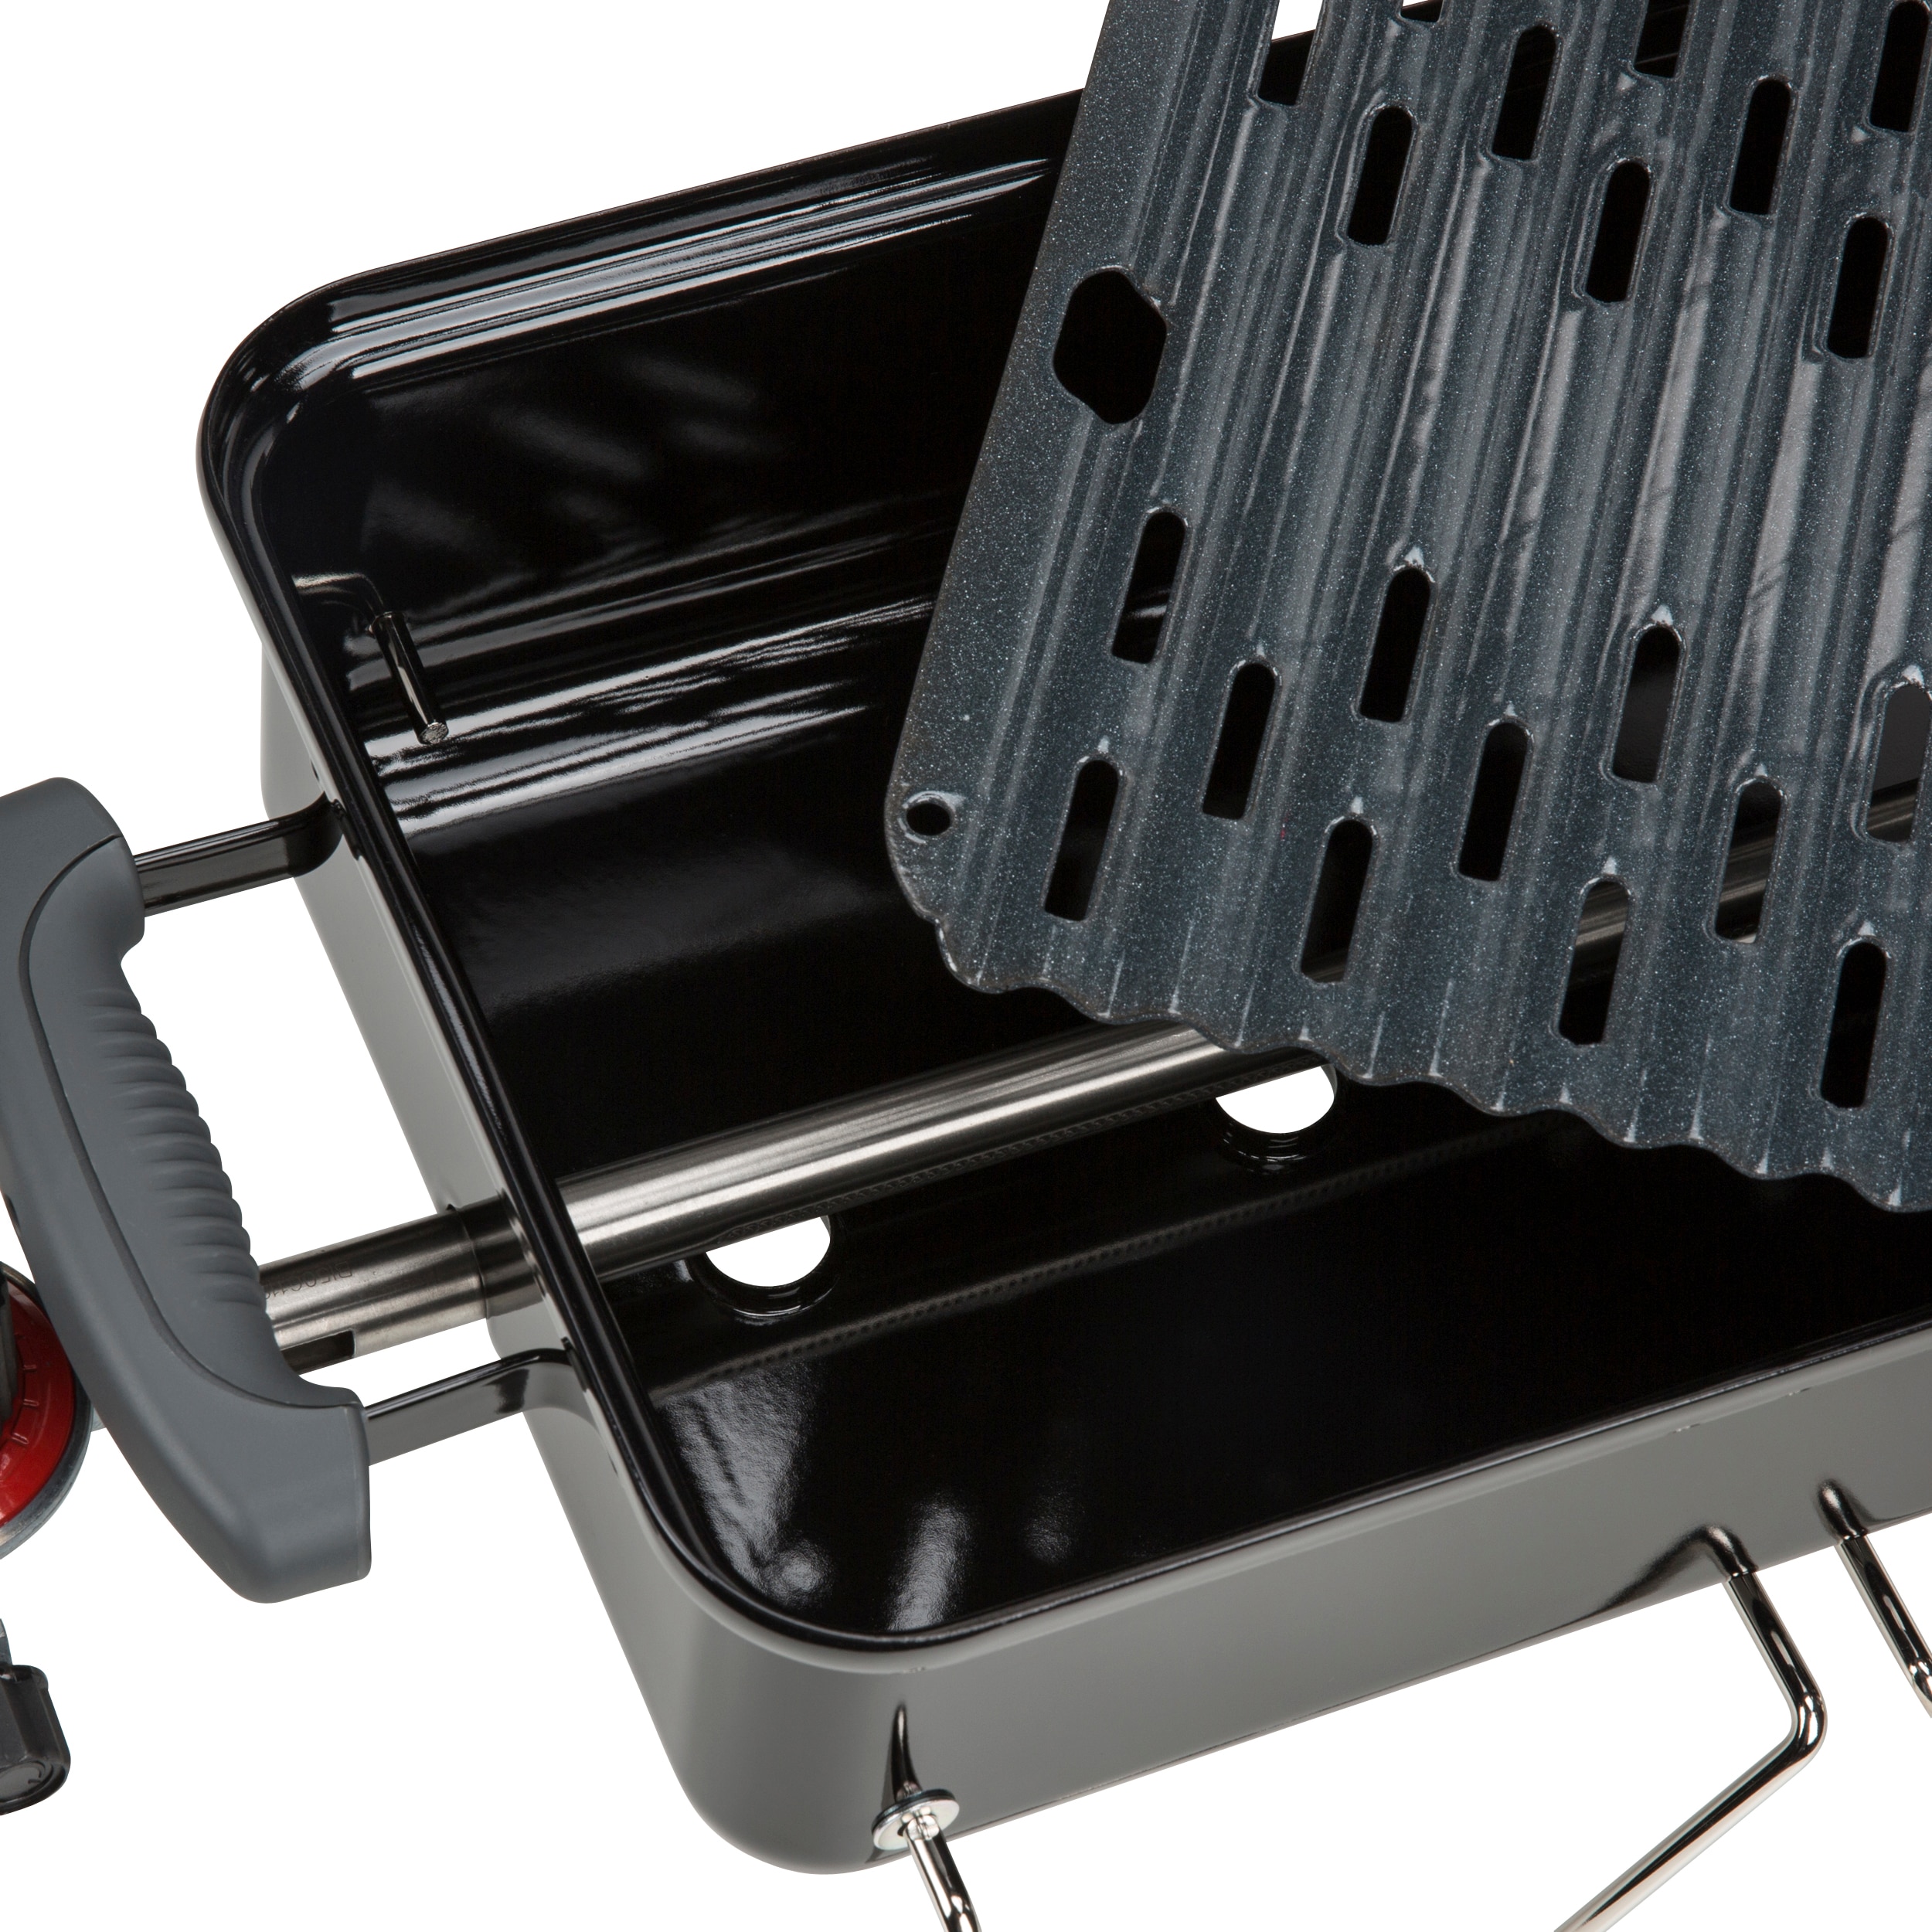 Go-Anywhere Portable Propane Gas Grill in Black